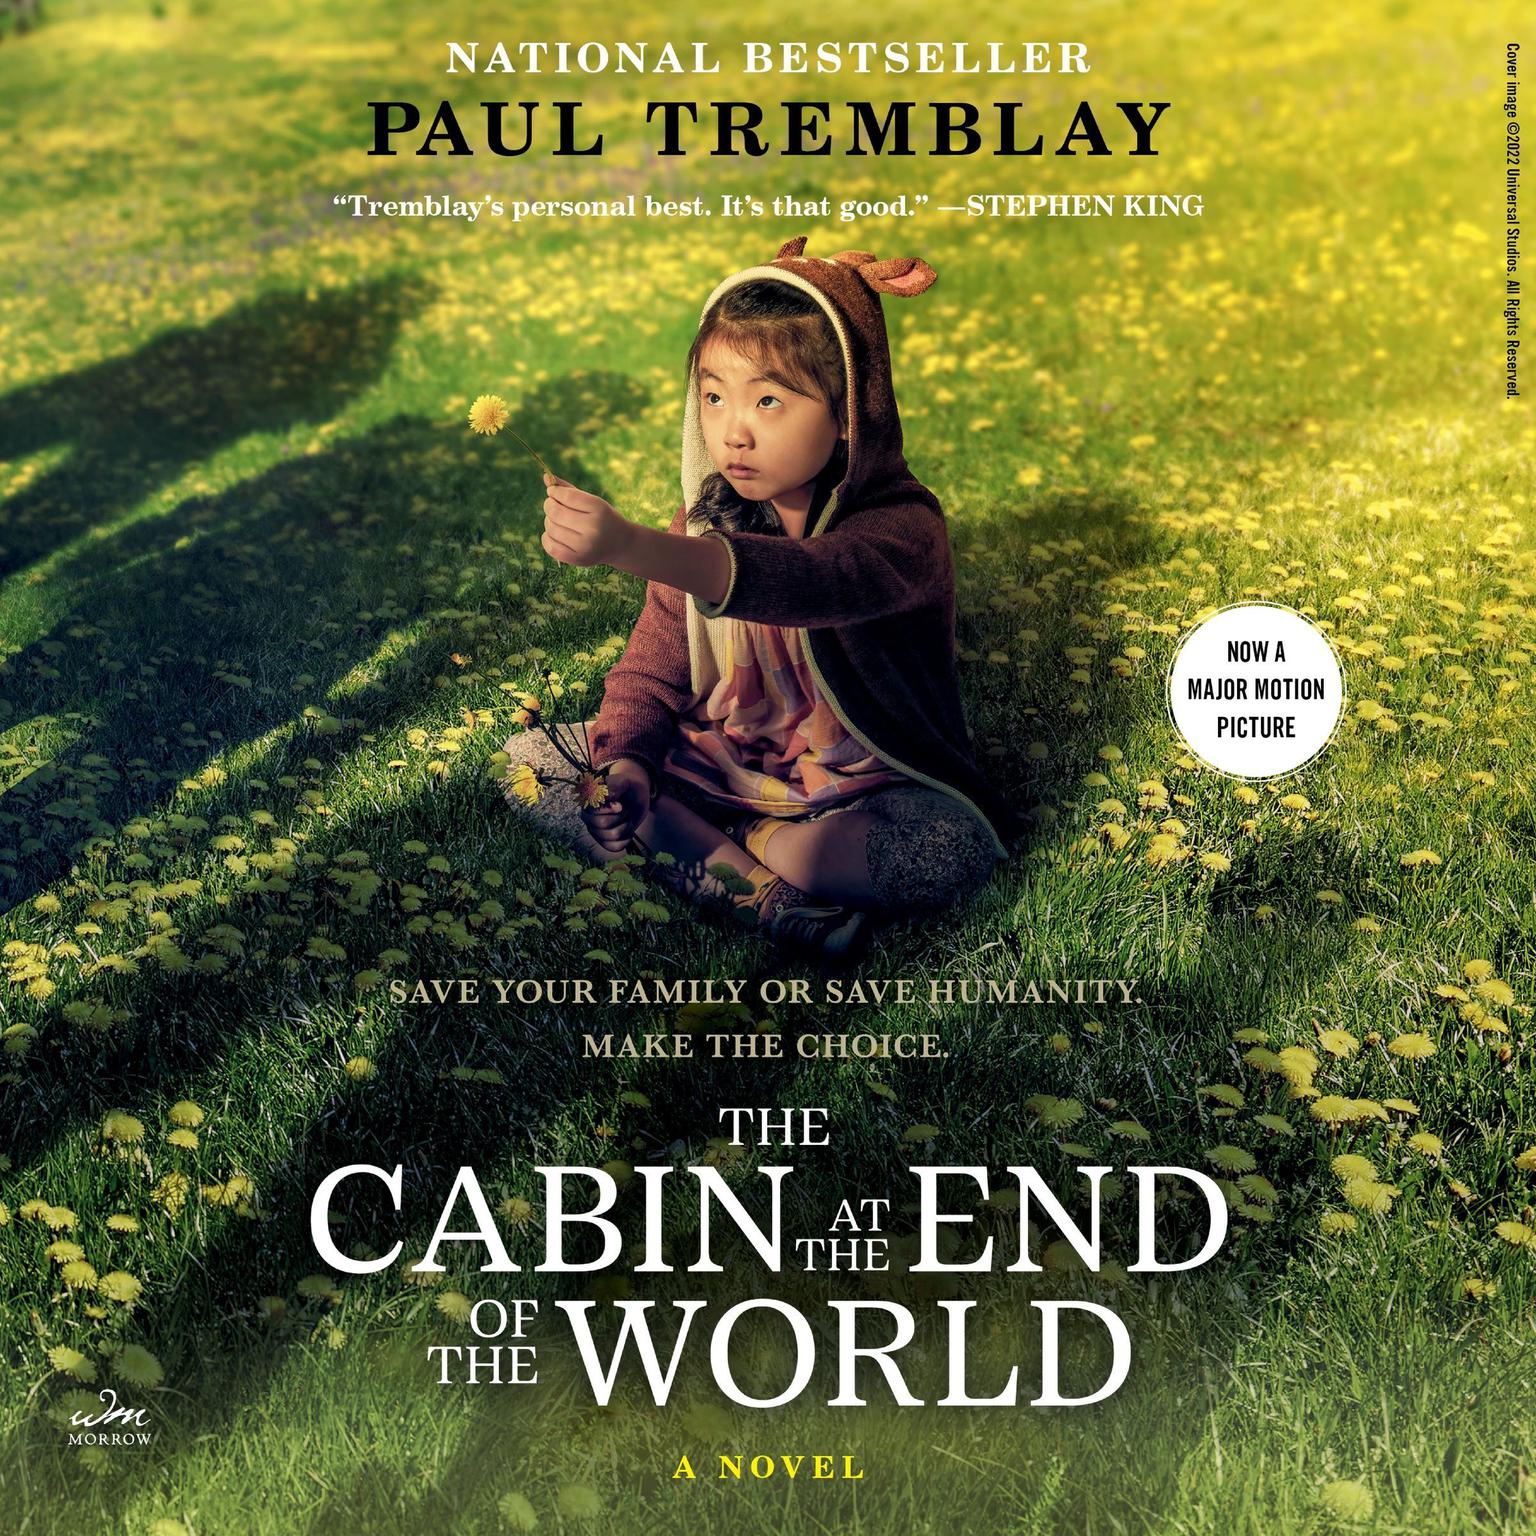 The Cabin at the End of the World: A Novel Audiobook, by Paul Tremblay